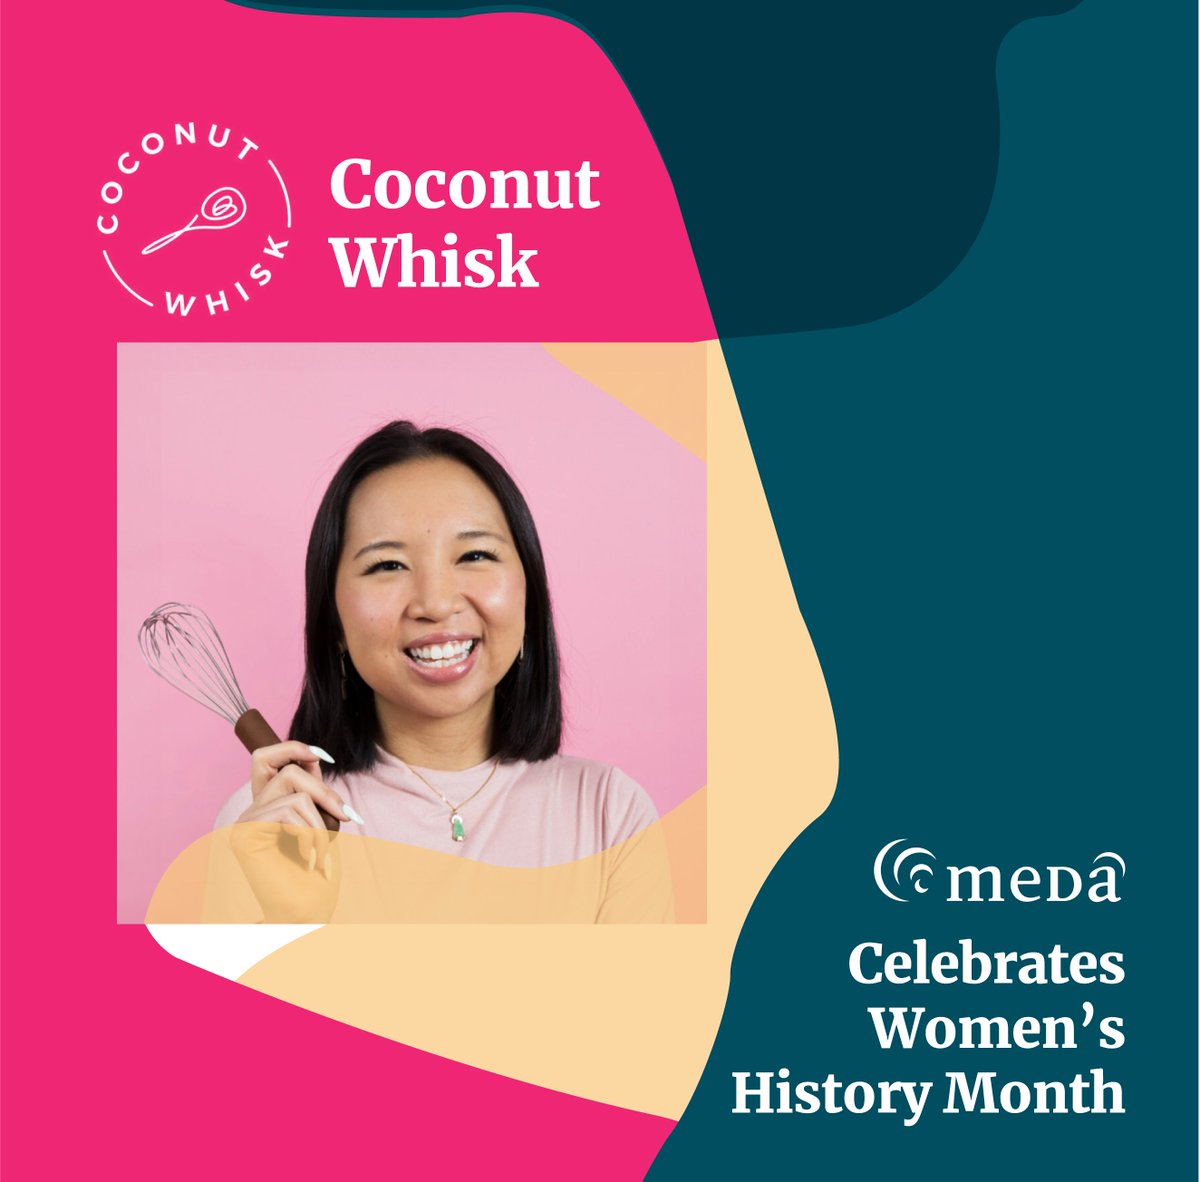 We are excited to highlight Bella Lam, Co-Founder of @coconutwhisk for Women's History Month. Coconut Whisk is a vegan and gluten-free baking mix company, by including Coconut Whisk products into your diet you are sure to elevate your breakfast and baking experience.